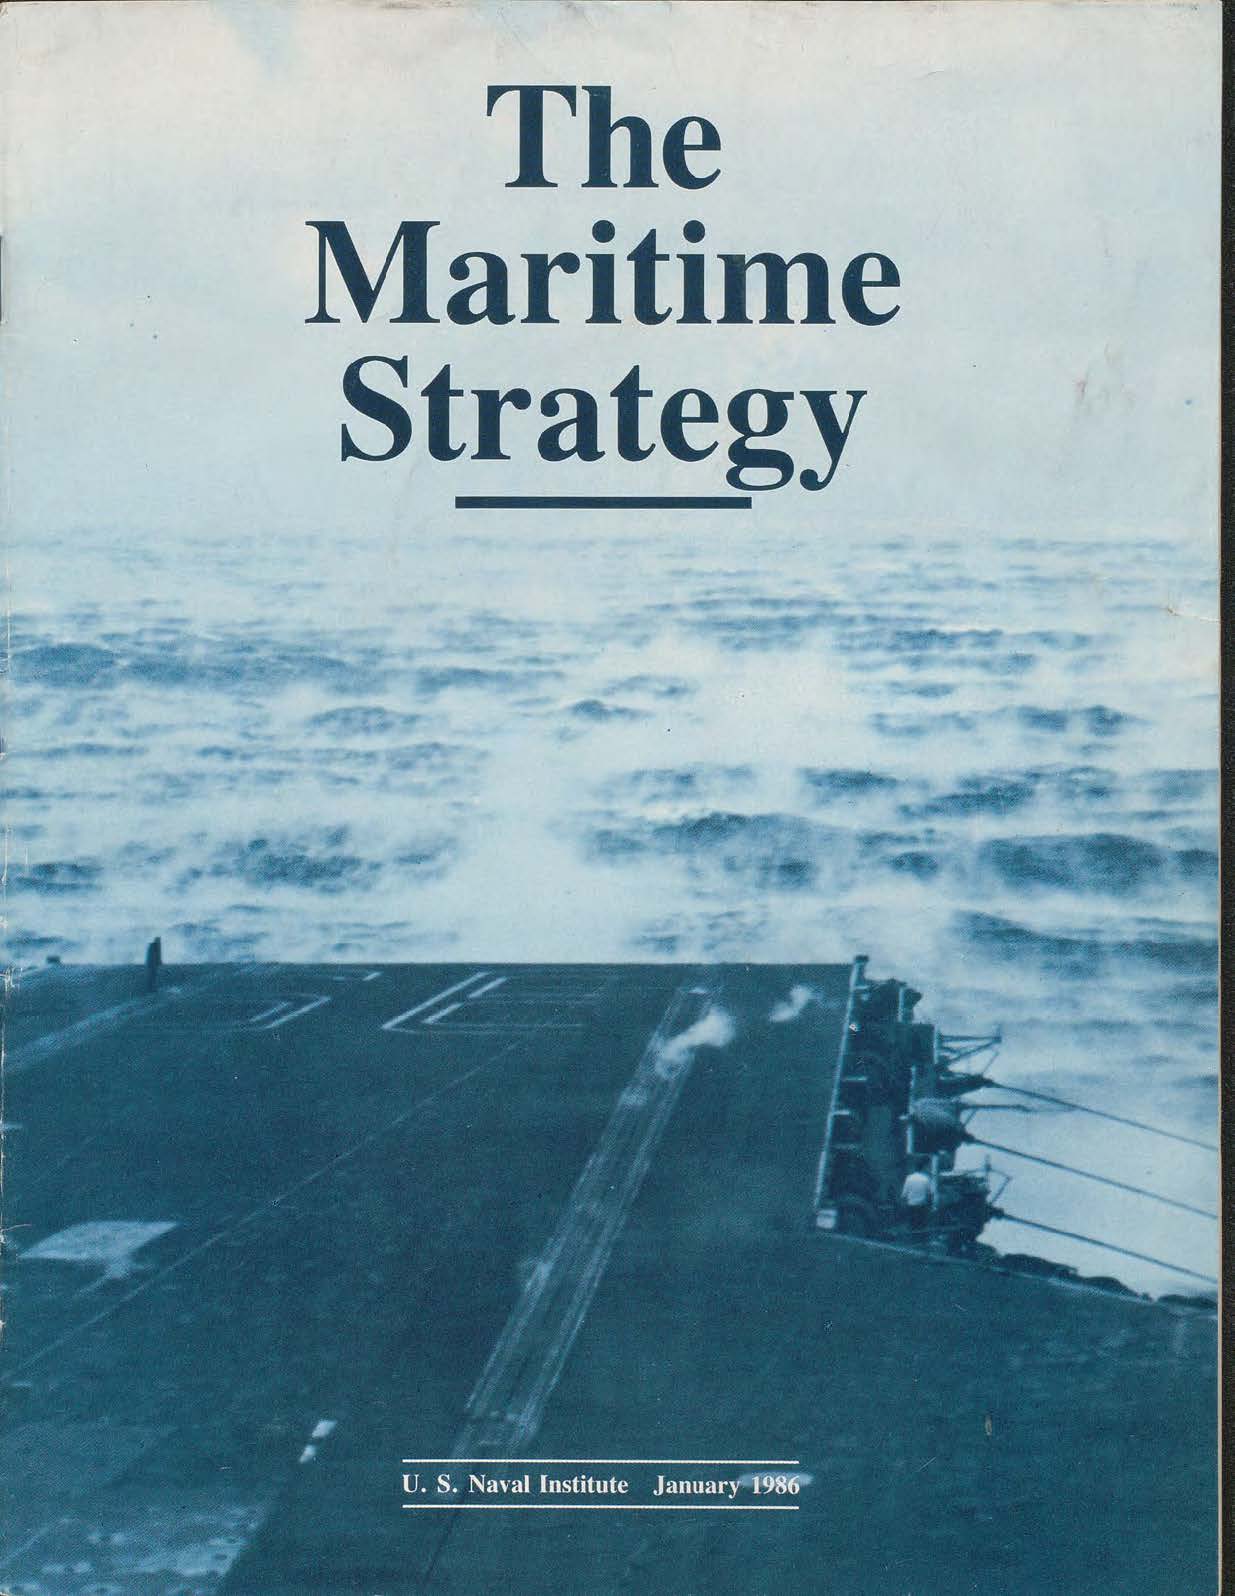 The Maritime Strategy